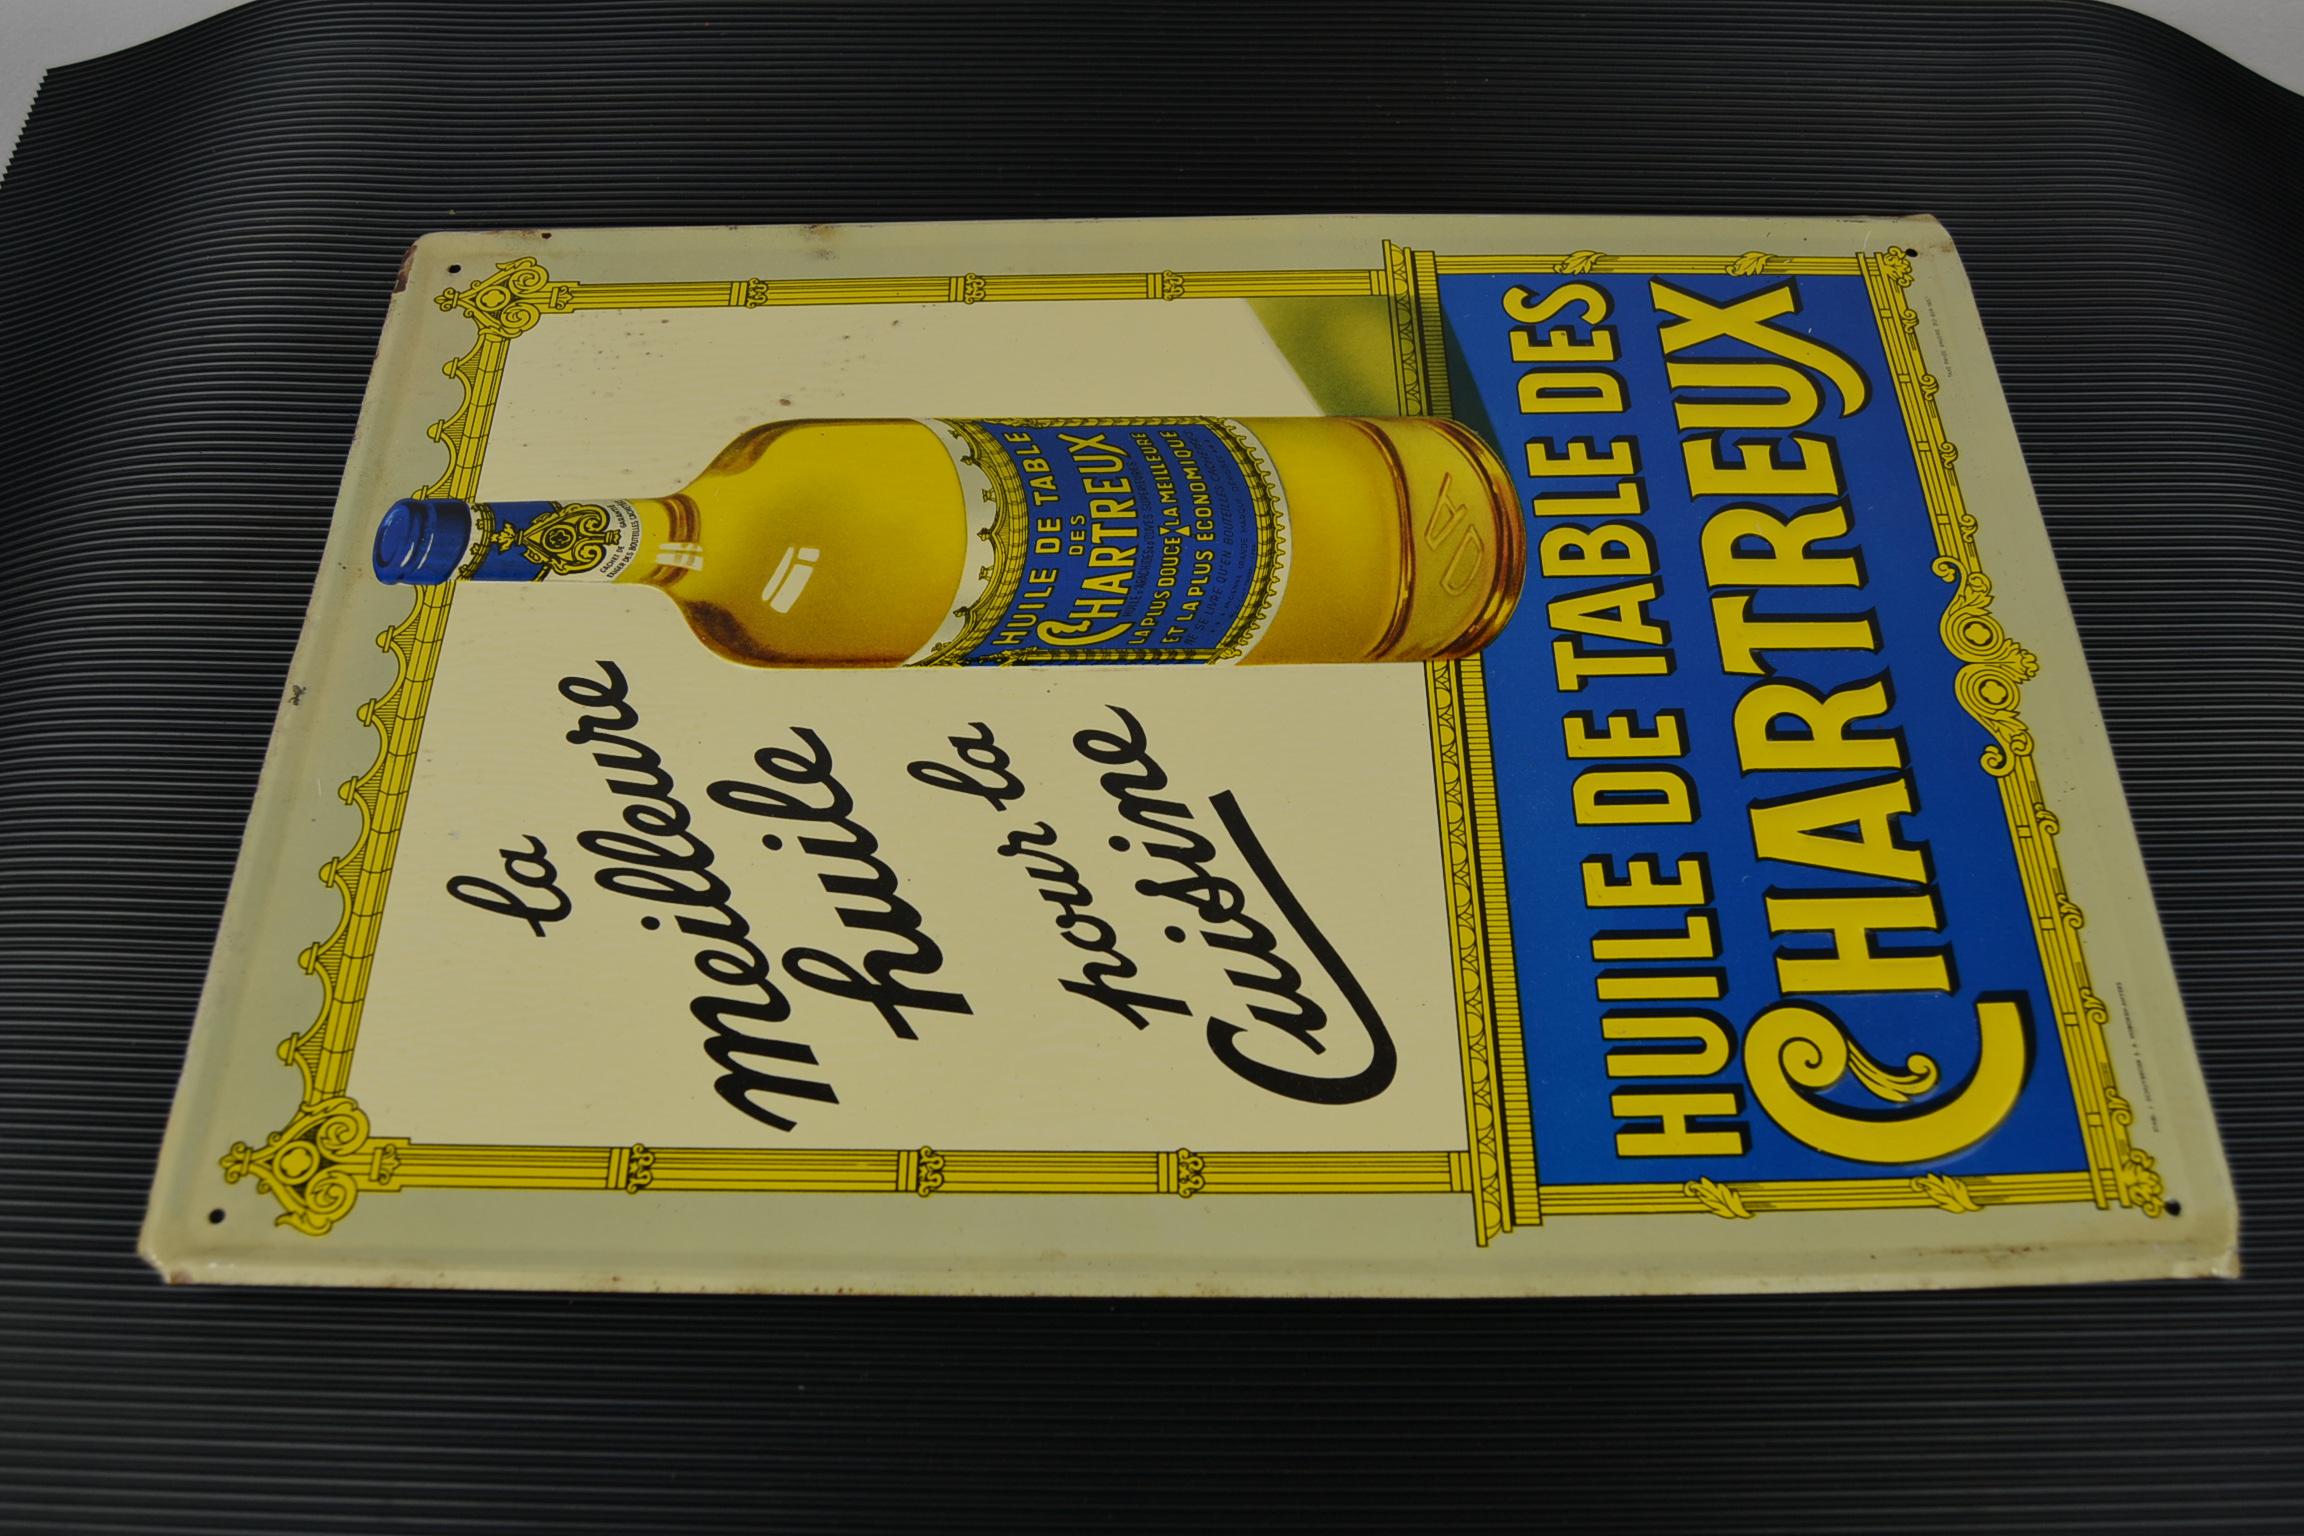 1957 Tin Advertising Sign for Table Oil, Vintage Kitchen Wall Decoration 8